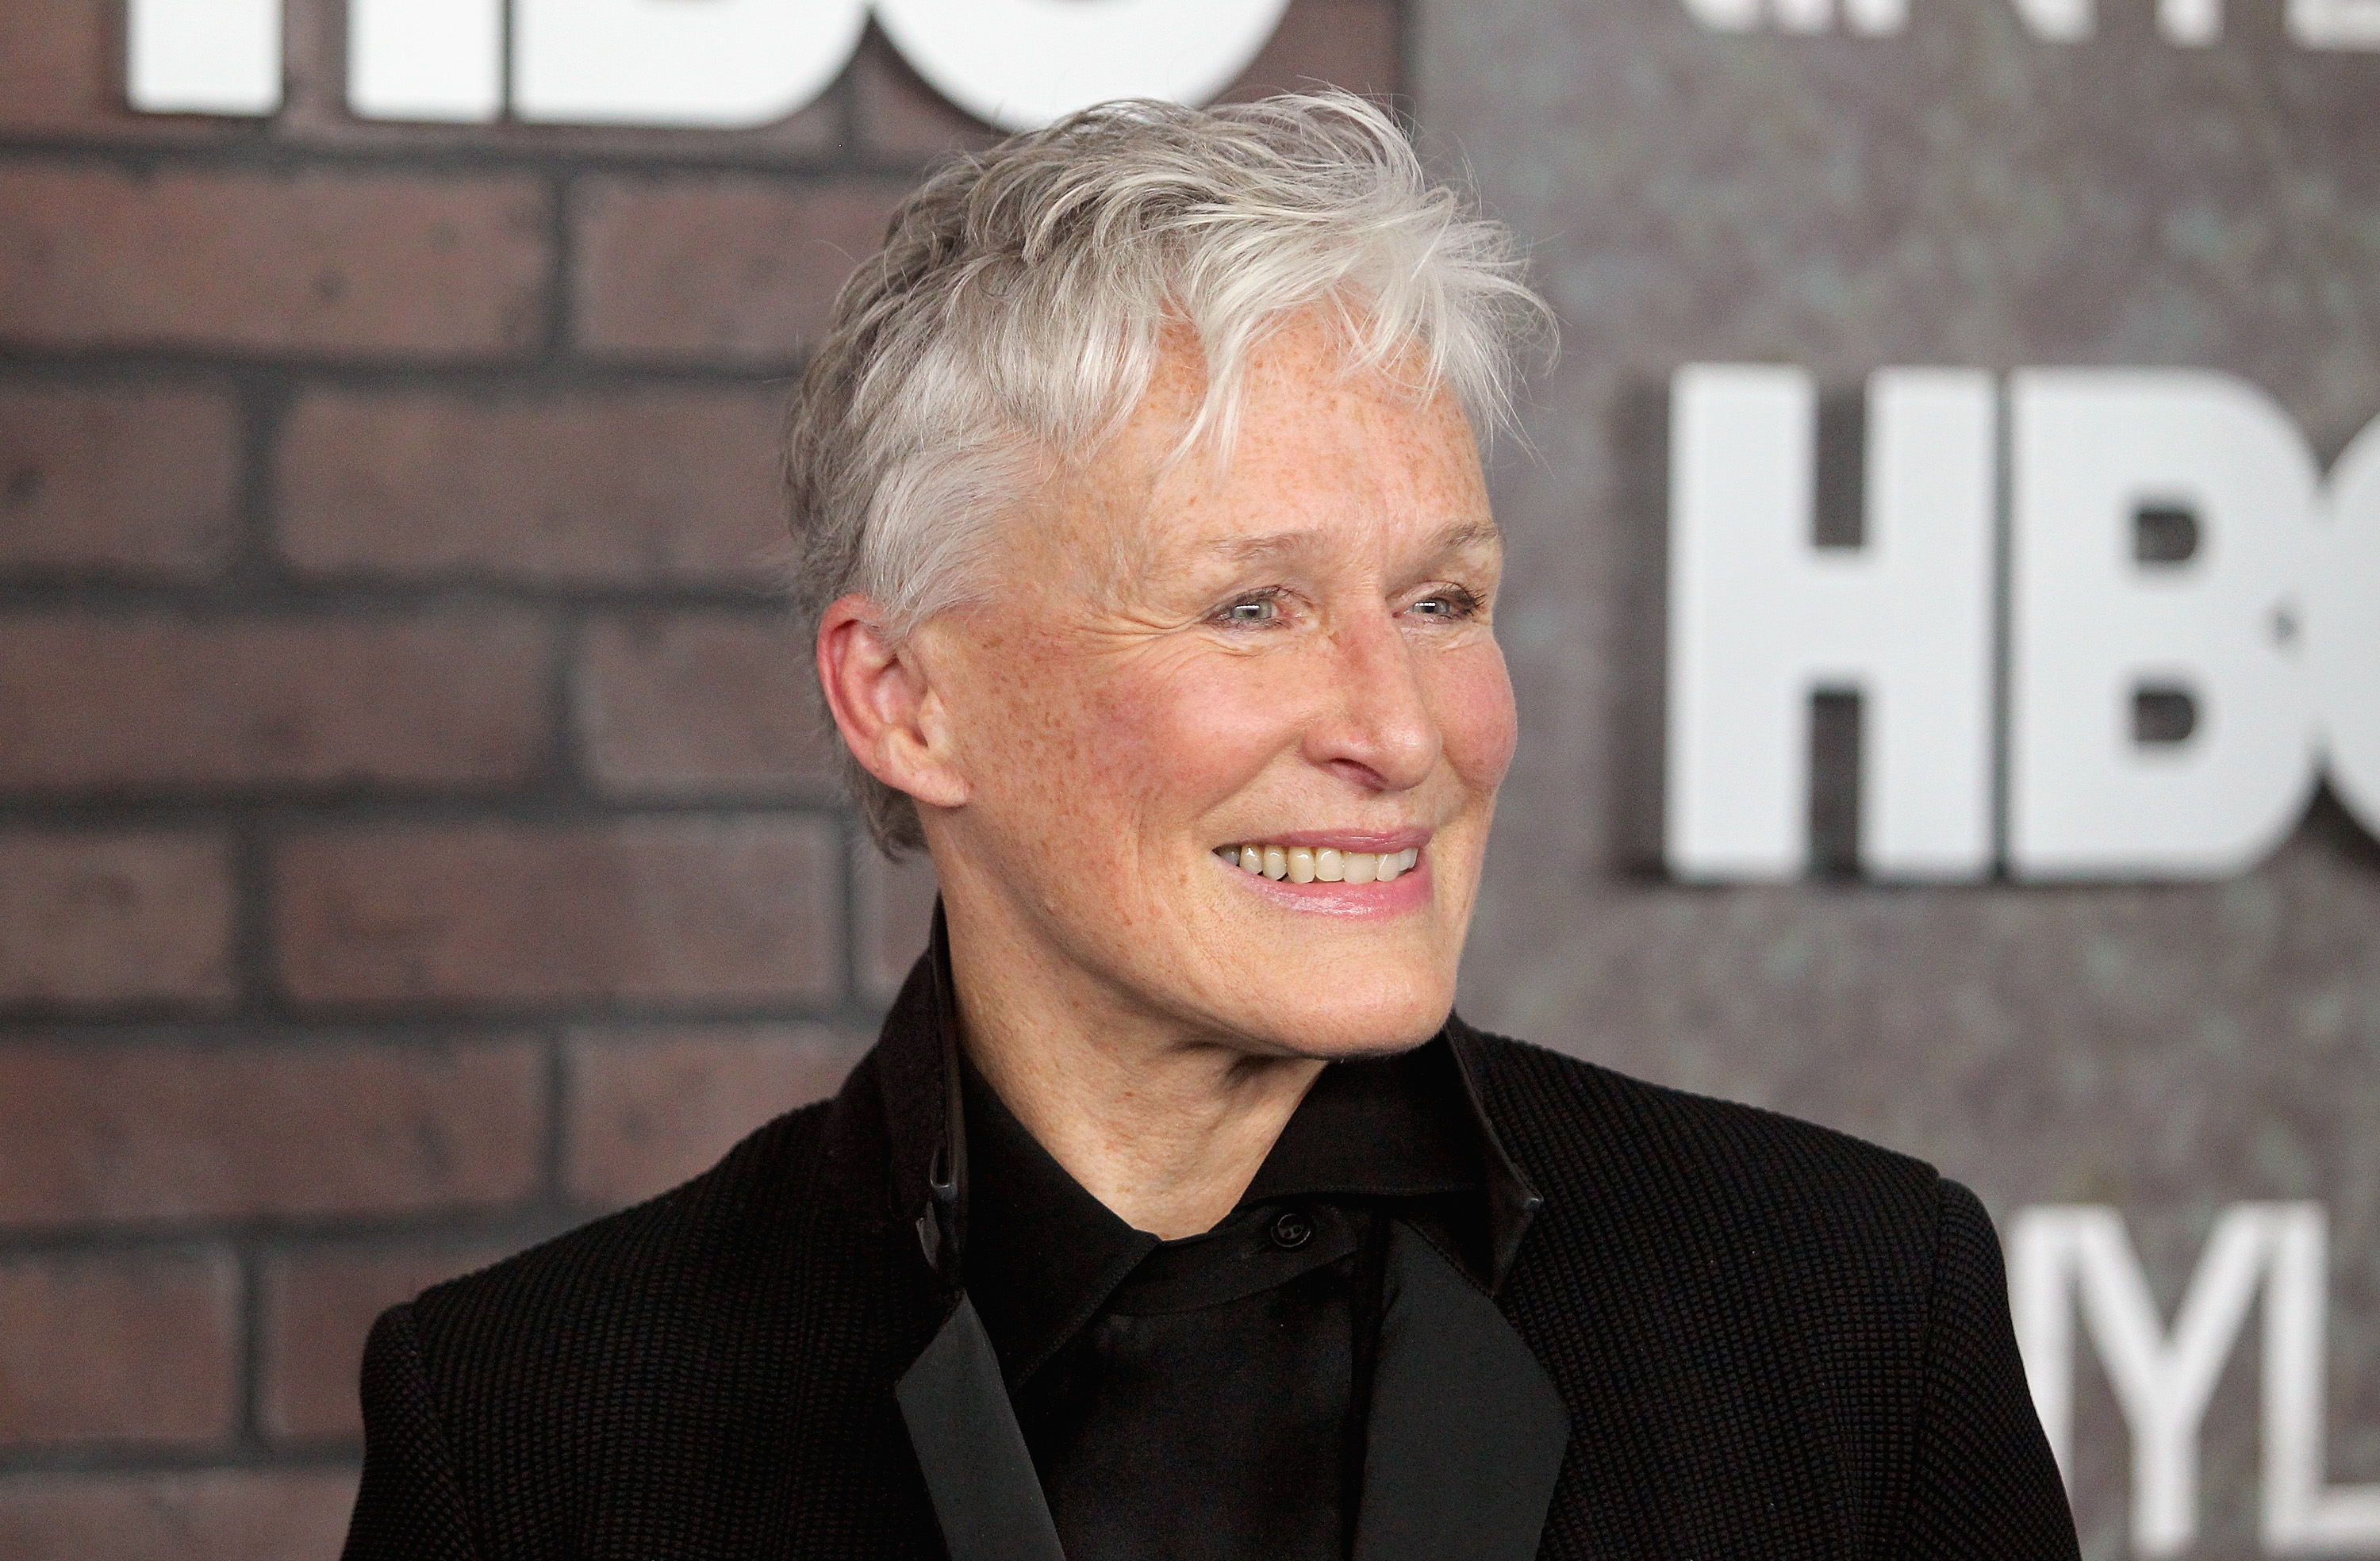 Glenn Close at the "Vinyl" New York premiere on January 15, 2016, in New York City | Source: Getty Images